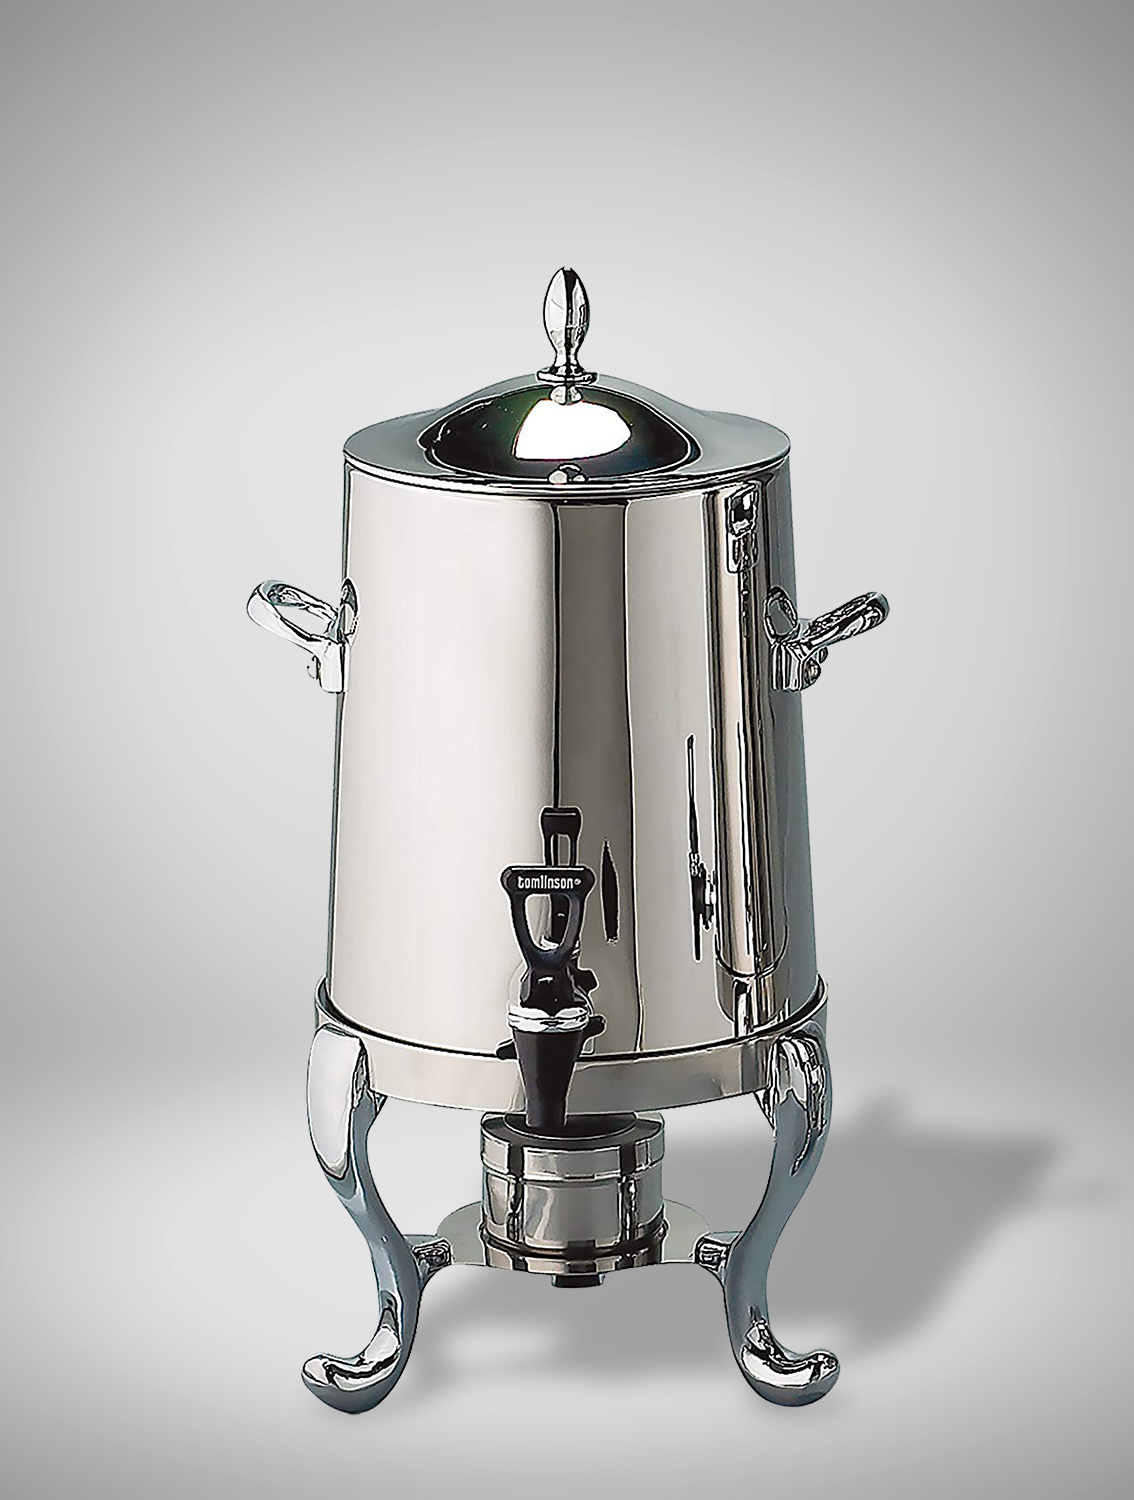 https://wcep.com/wp-content/uploads/2019/11/4020-1707-Stainless-Coffee-Urn_featured.jpg